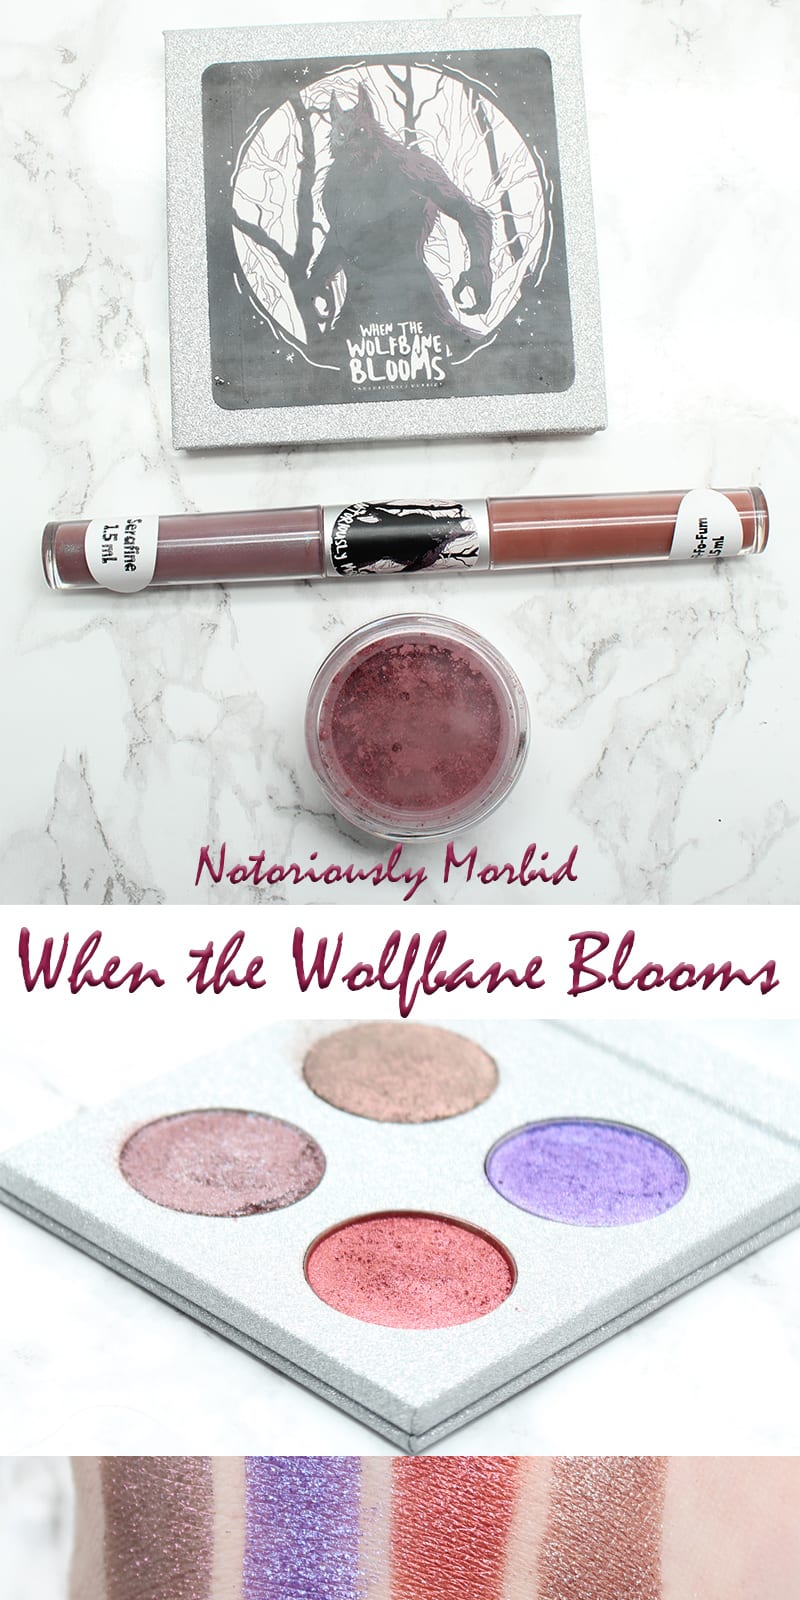 Notoriously Morbid When the Wolfbane Blooms Vegan Halloween Palette Review Swatches Looks